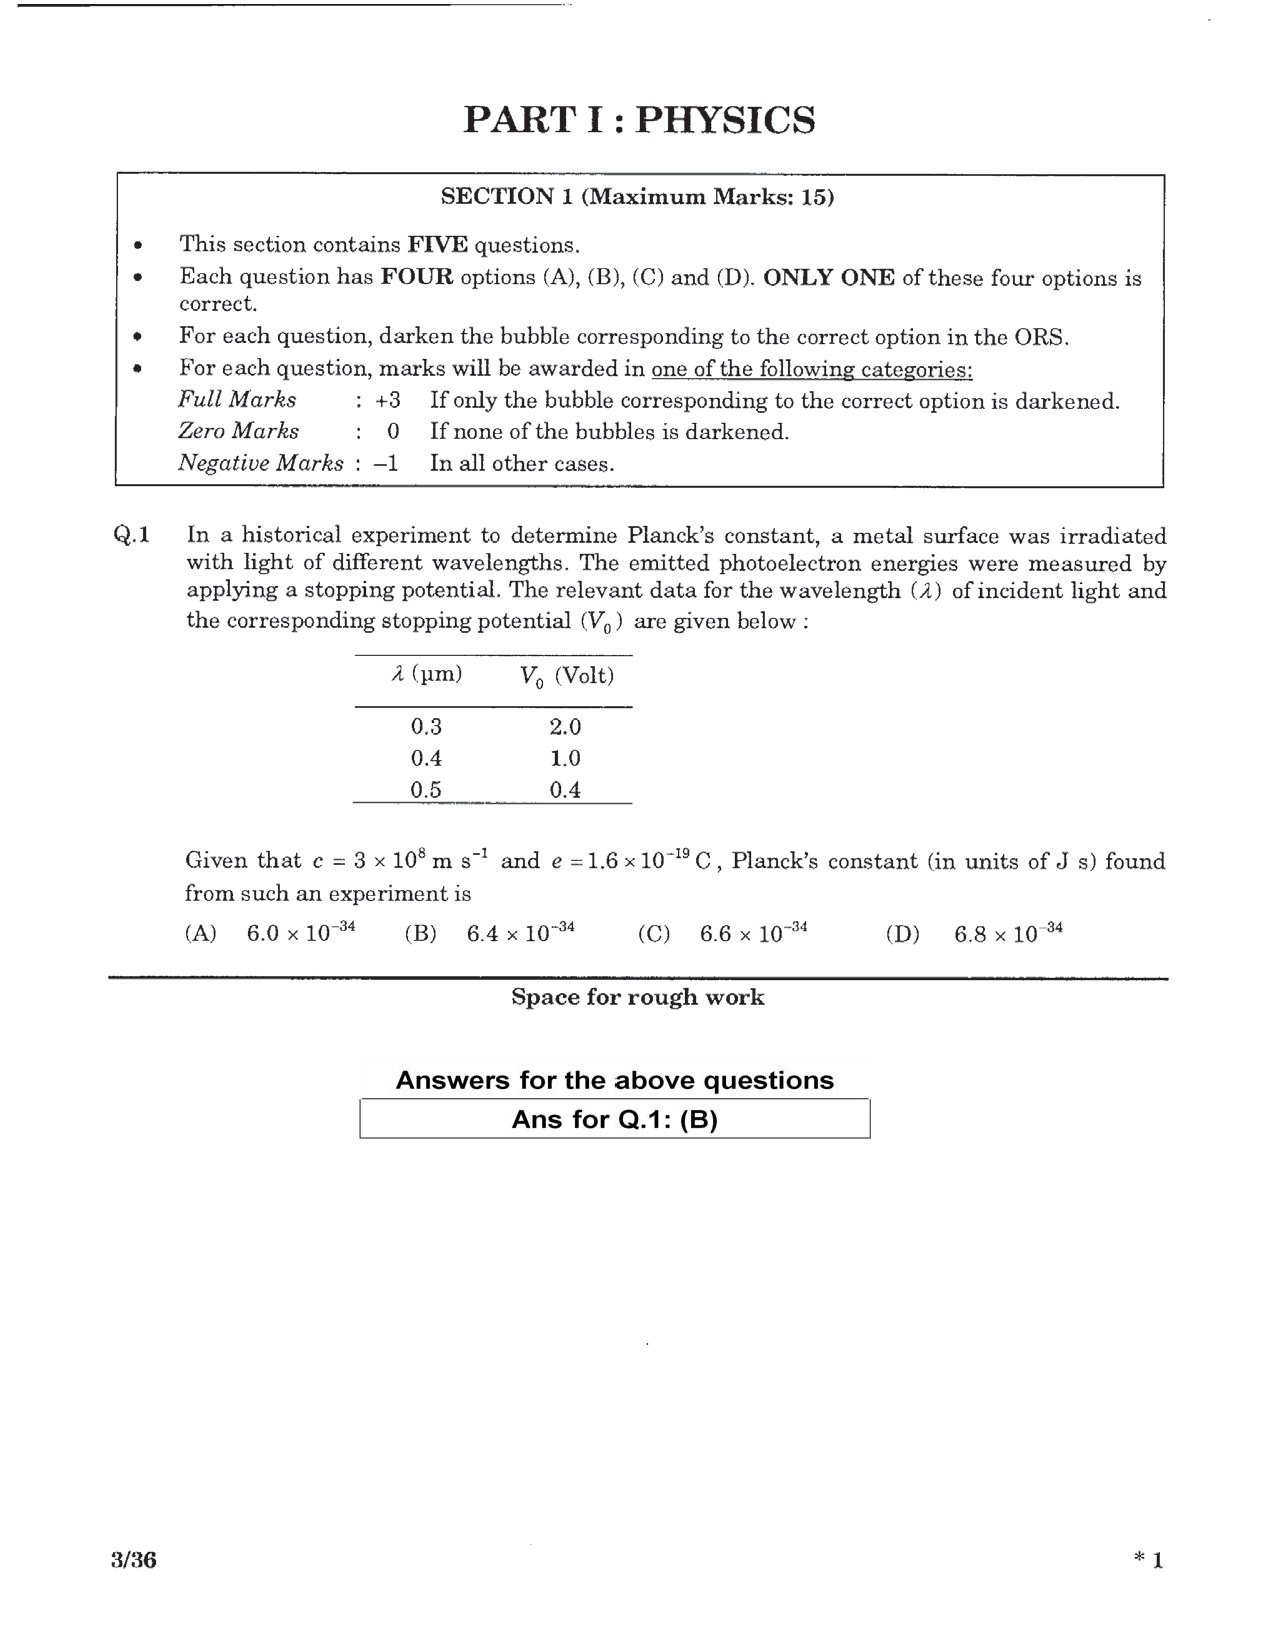 JEE Advanced Exam Question Paper 2016 Paper 1 Physics 1